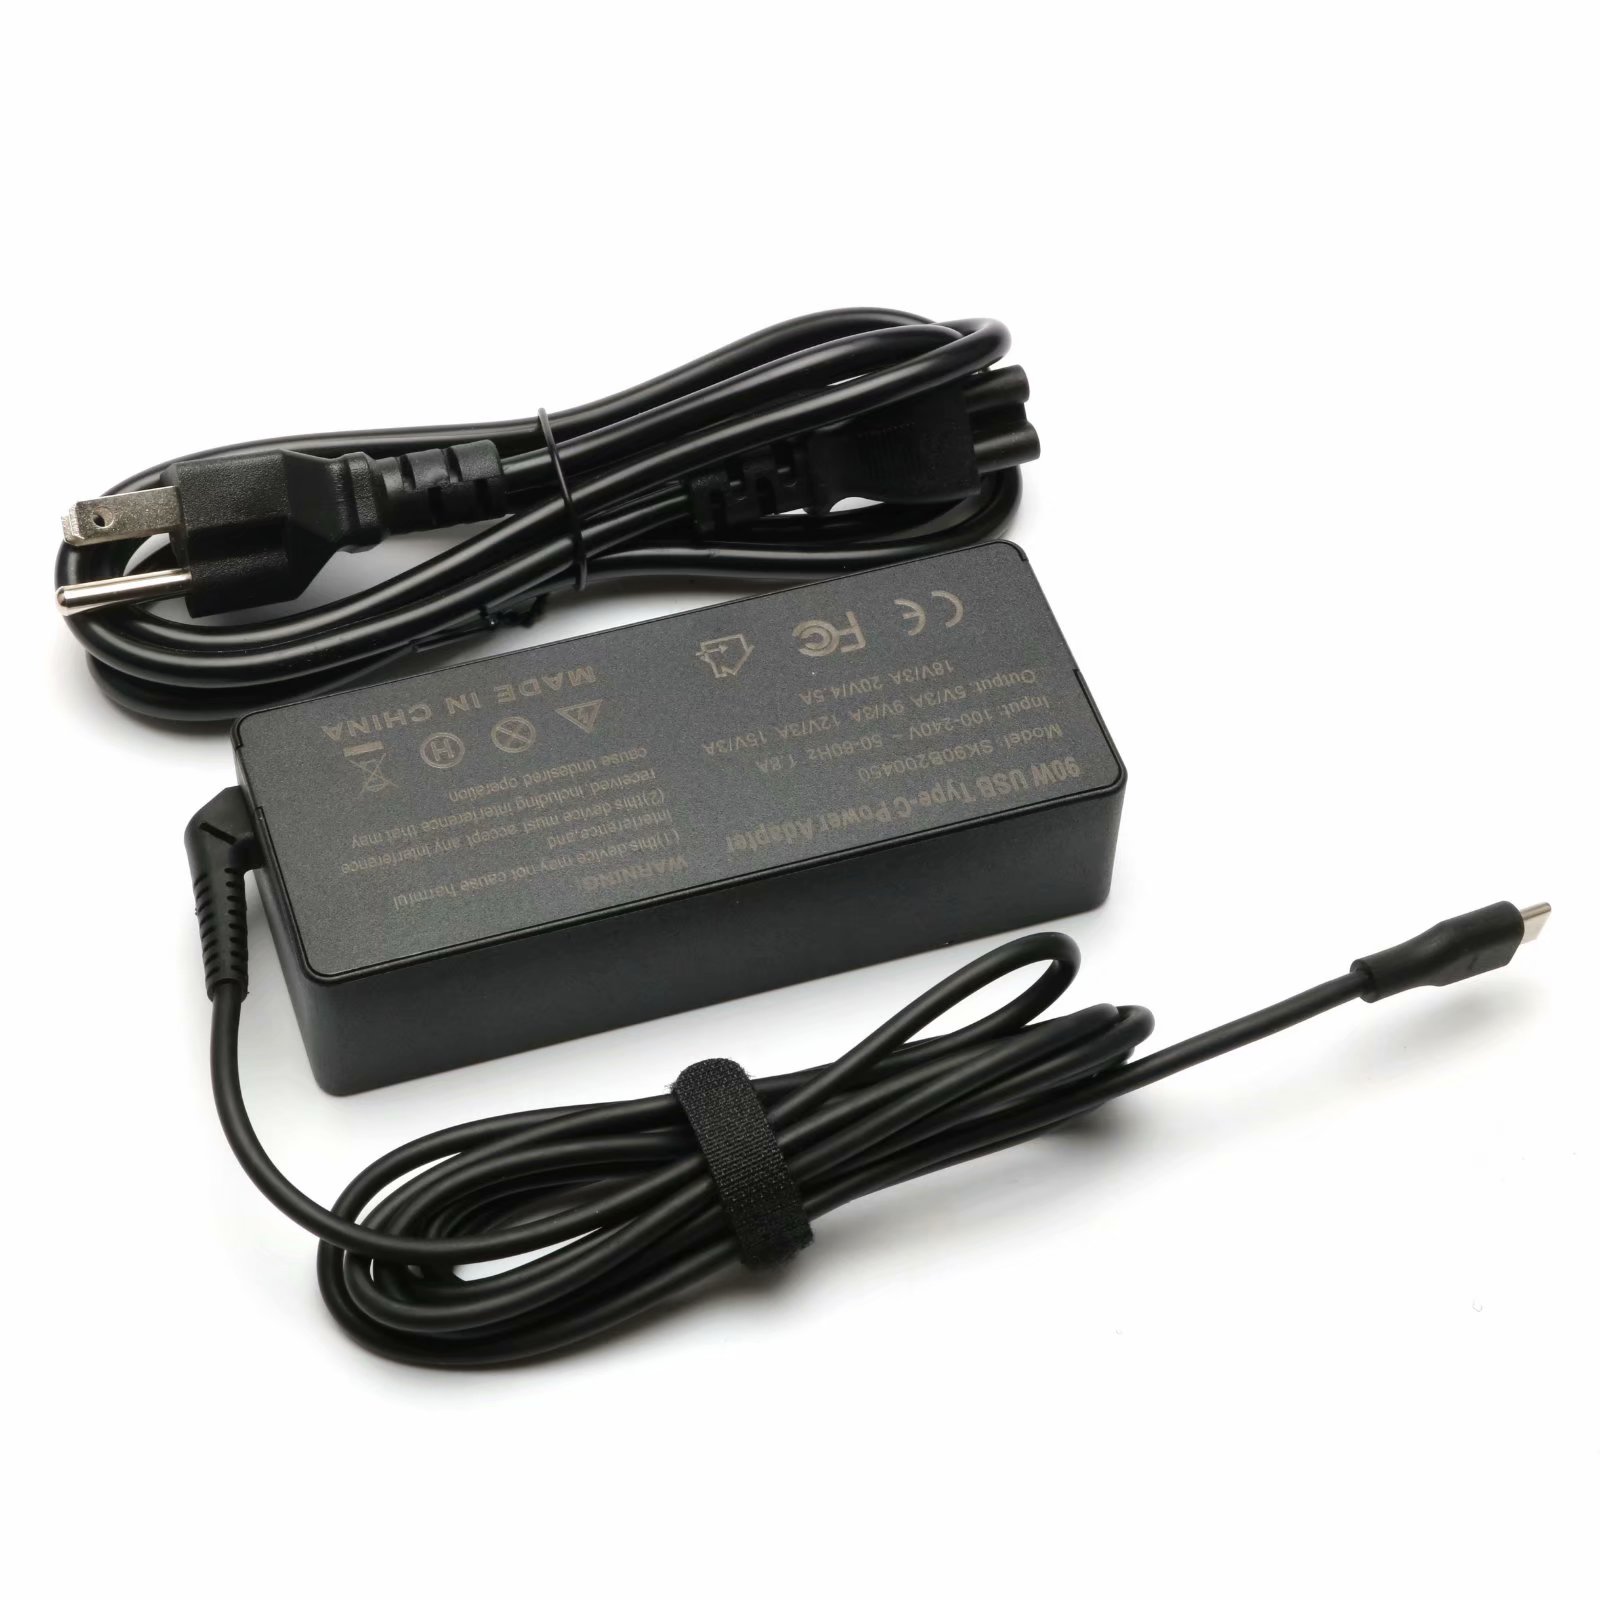 90W 20V 4.5A USB C Type-C Charger Power Adapter for HP Spectre x360 13 TPN-CA01 N8N14AA#ABL Acer Travelmate B1 Lenovo Yoga 720 910 ThinkPad X1 Yoga5 Pro DELL XPS12 XPS13 - image 5 of 10